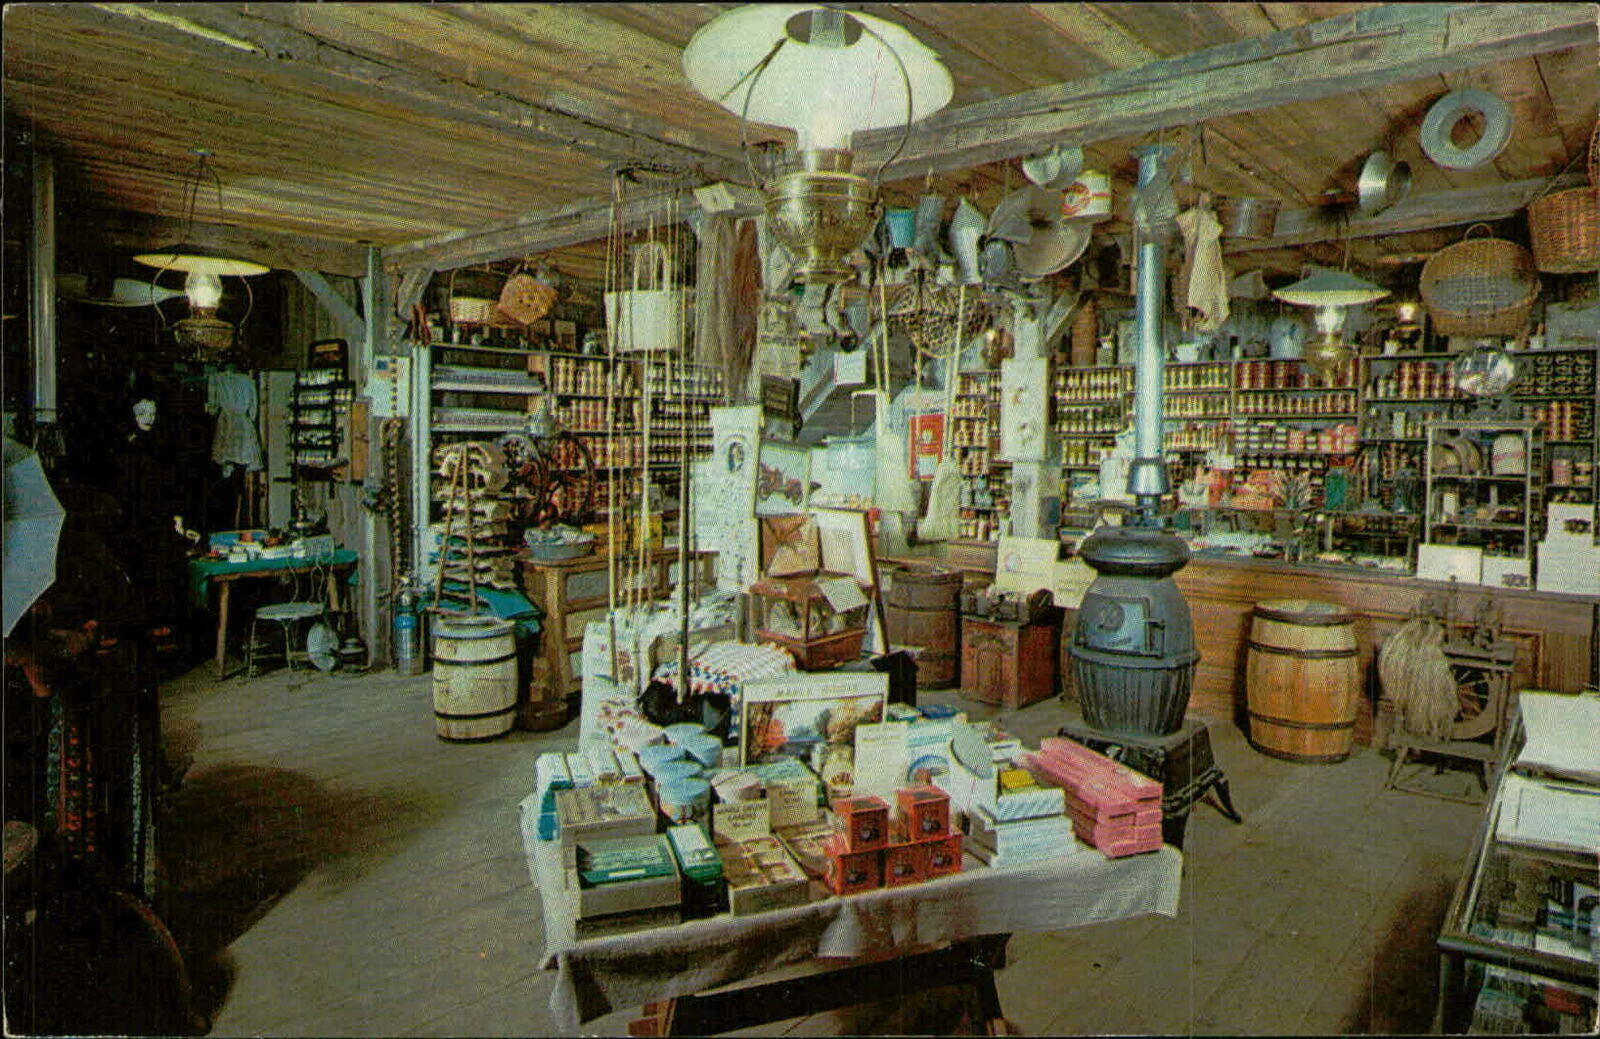 Postcard: Silversmith Country Store located at the Yankee Silversmith Inn